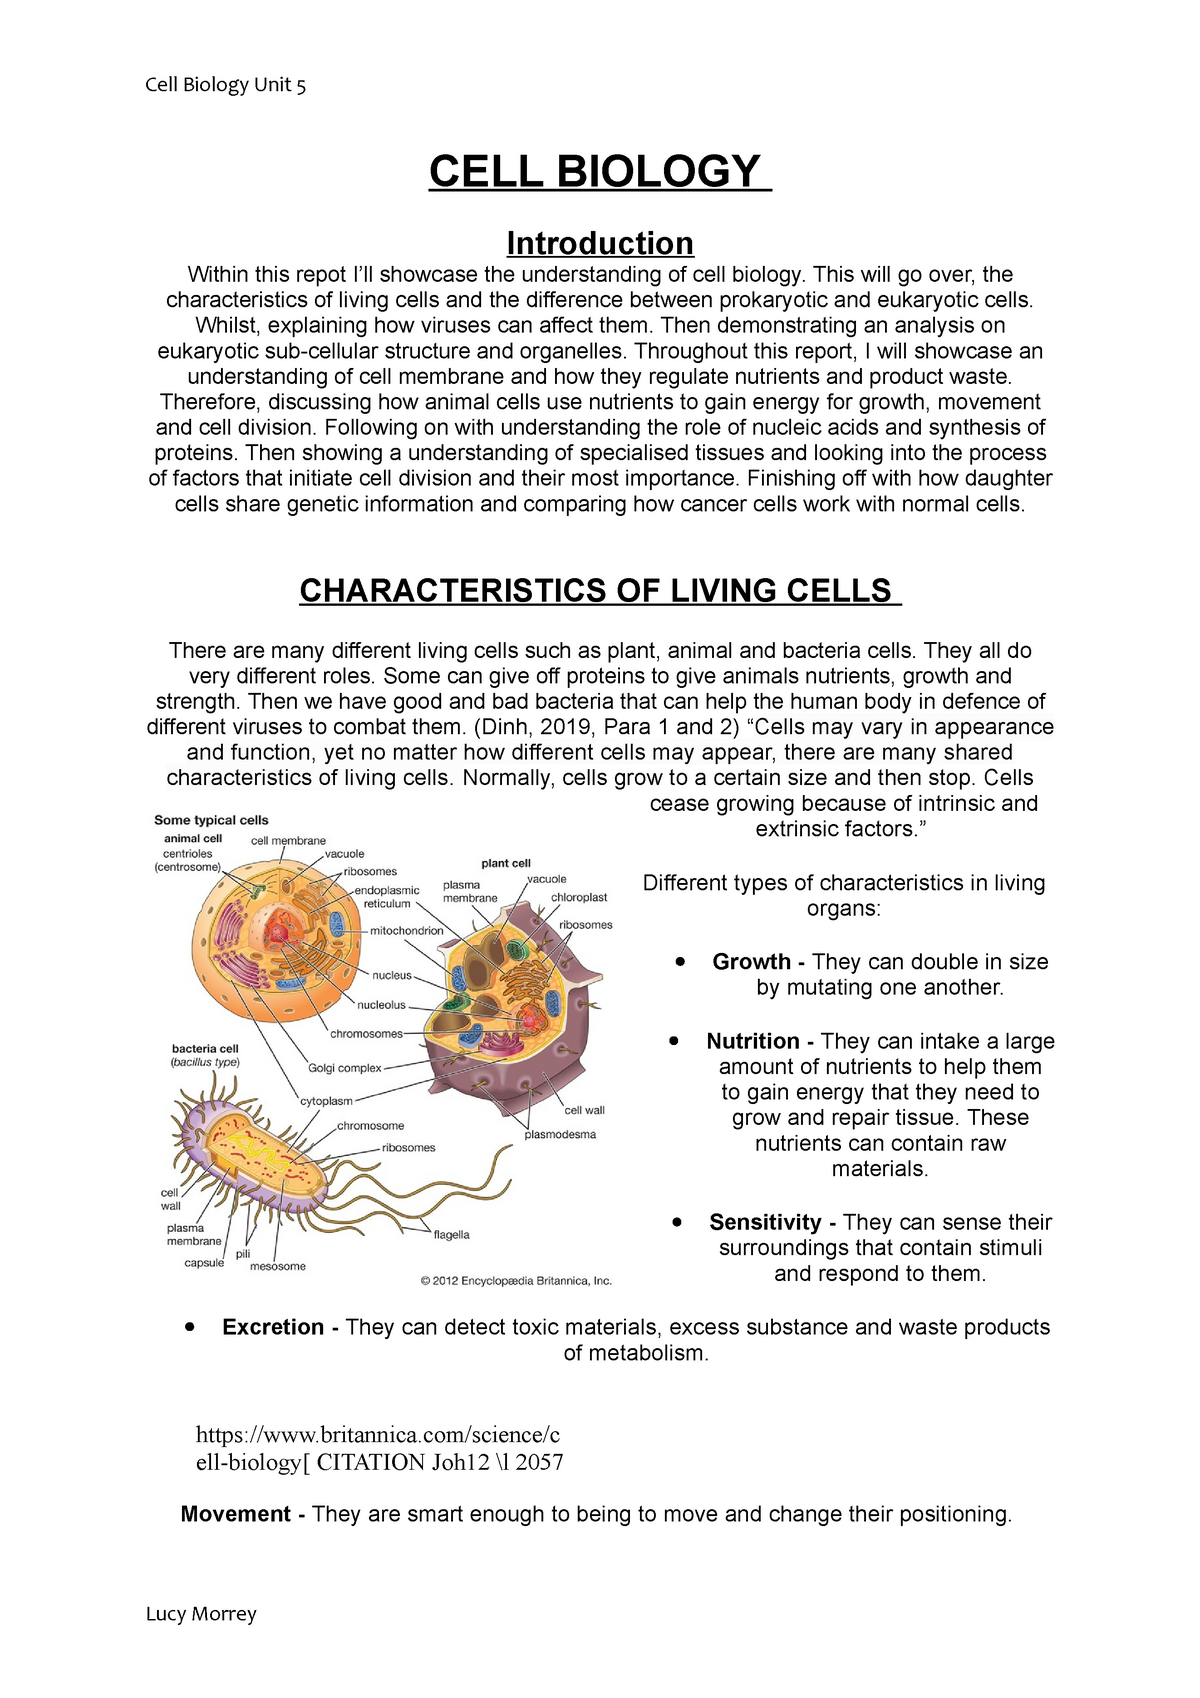 introduction to cell biology assignment